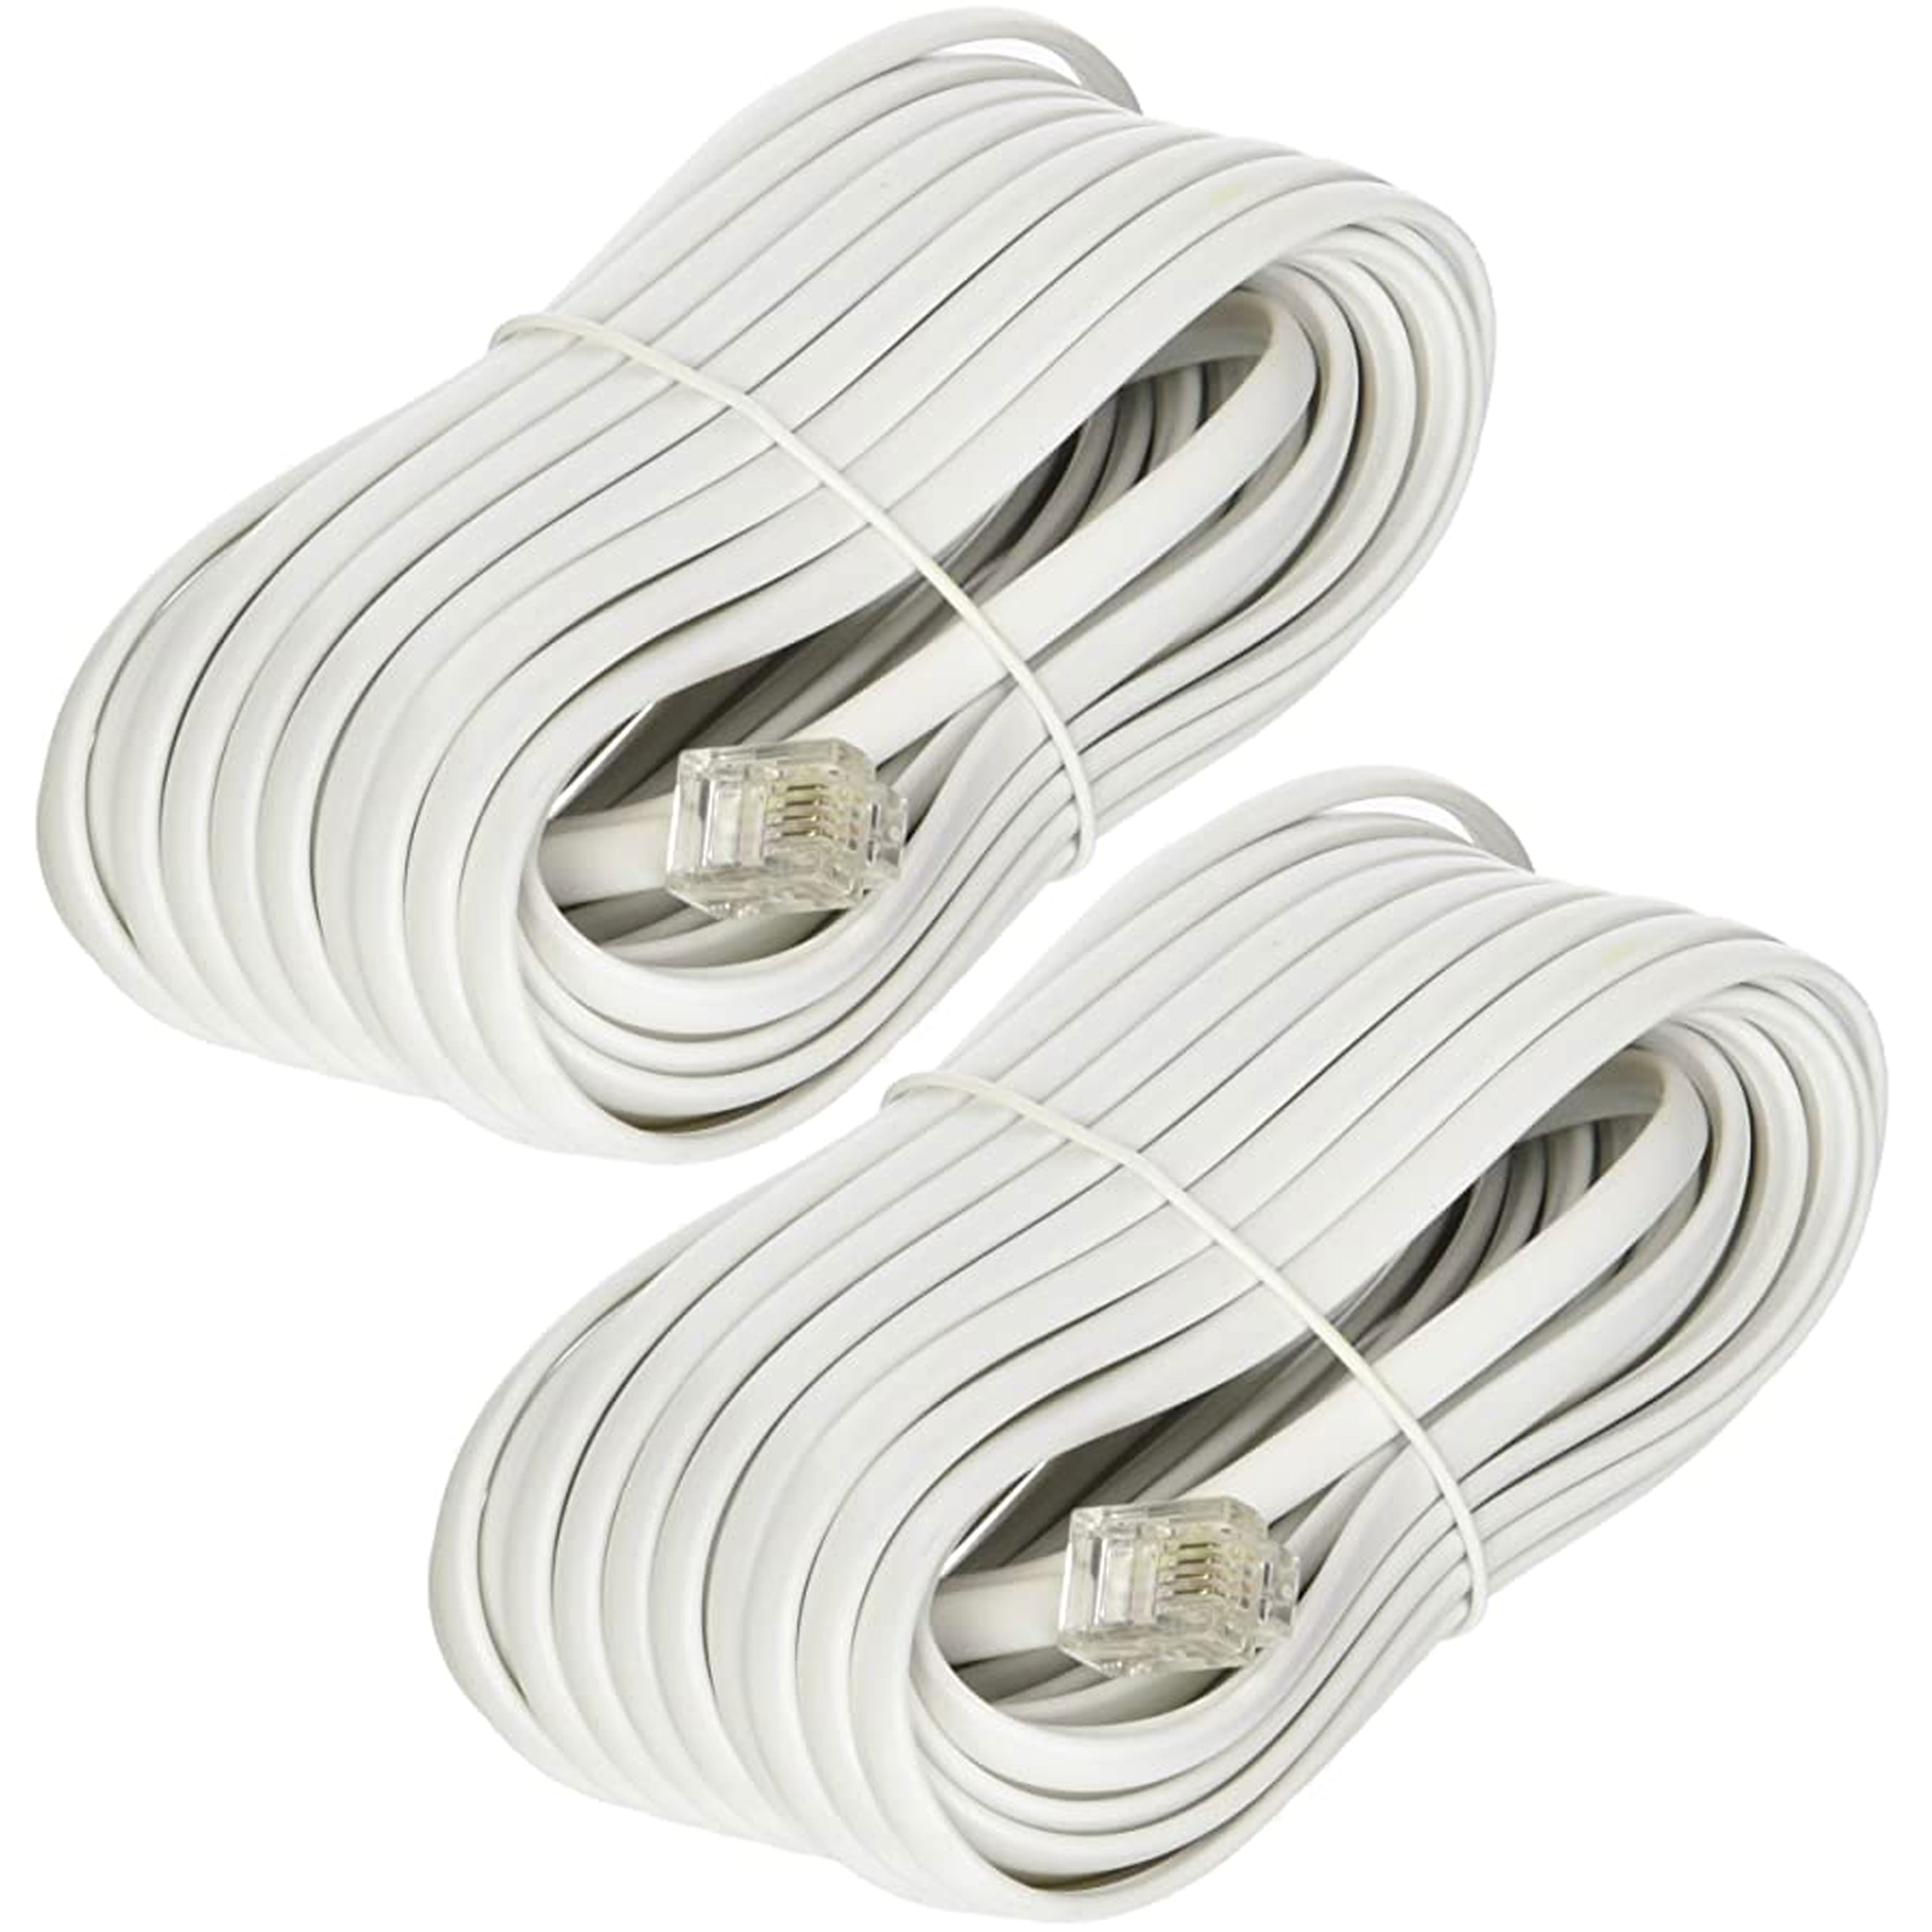 NEW 50 FT FOOT TELEPHONE PHONE EXTENSION CORD CABLE LINE WIRE WHITE RJ11 MODULAR 